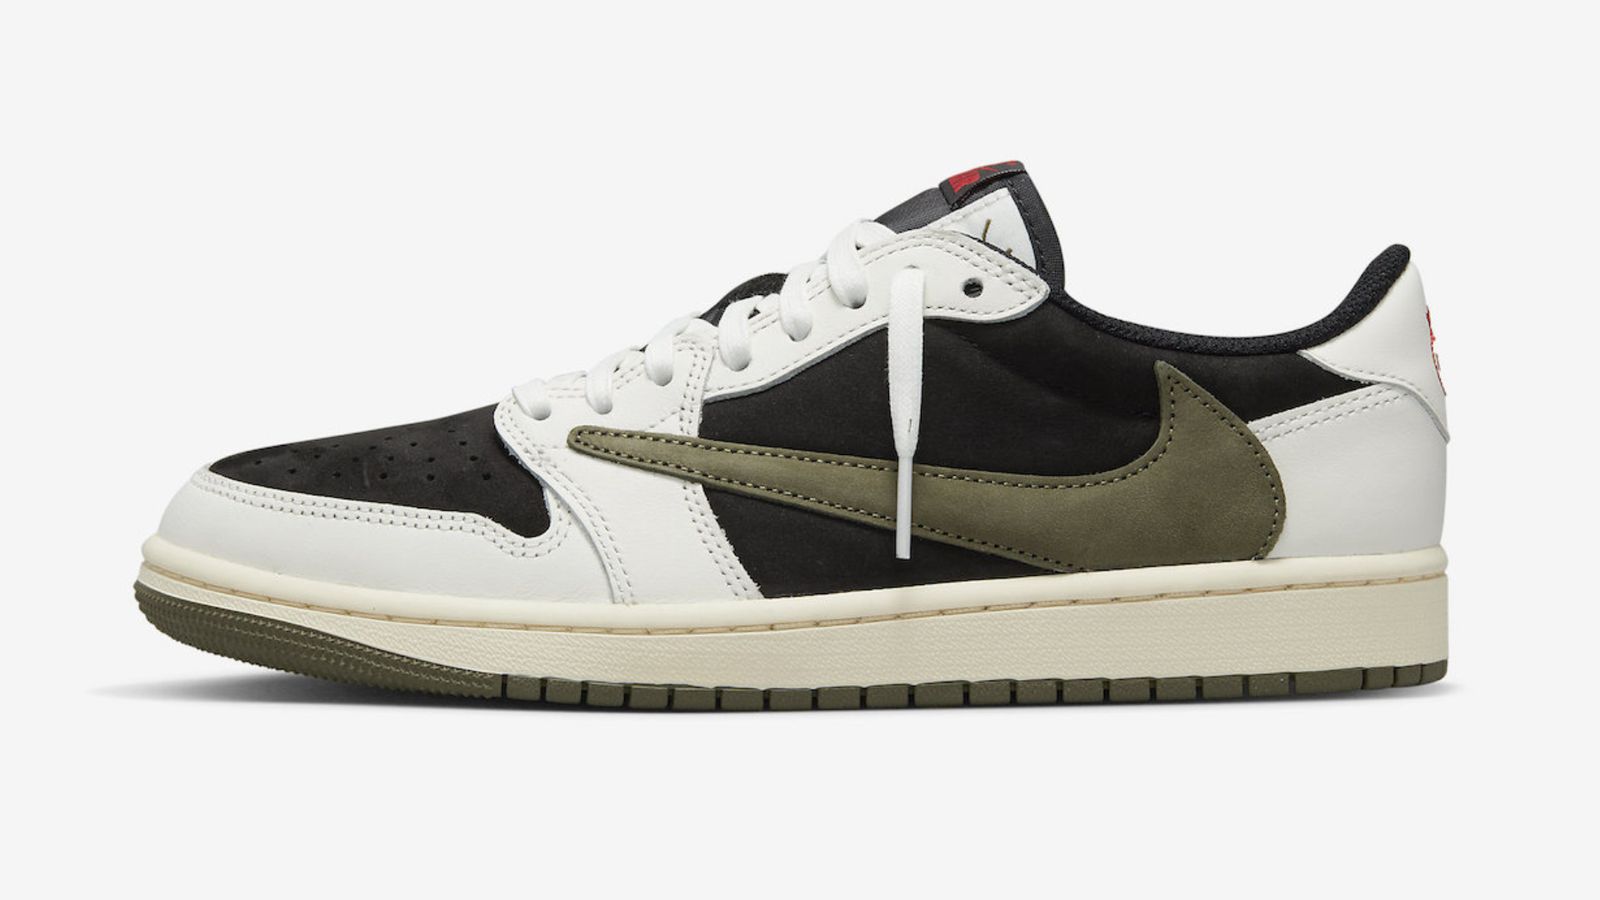 Travis Scott x Air Jordan 1 Low "Olive" product image of an off-white and black low-top featuring an Olive Swoosh.